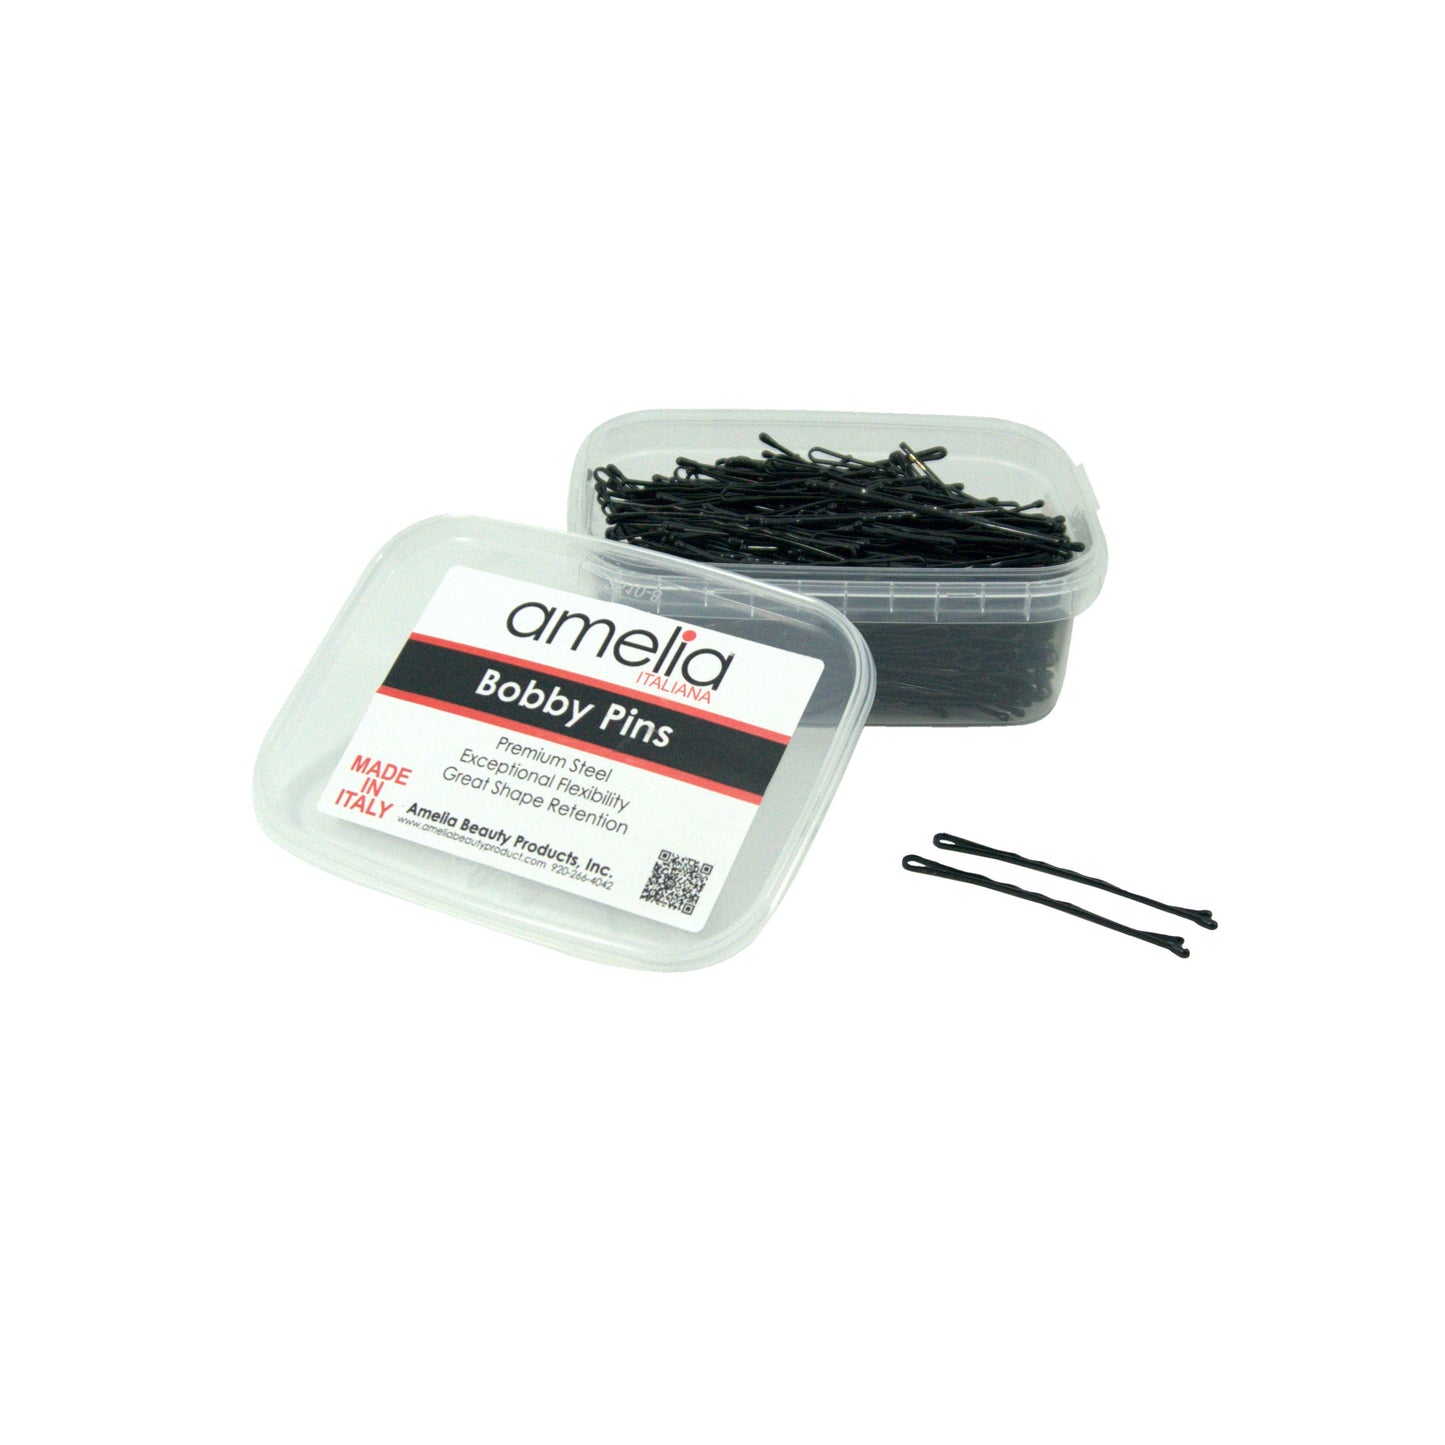 280, Black, 2.4in (6.0cm), Italian Made Bobby Pins, Recloseable Stay Clean and Organized Container